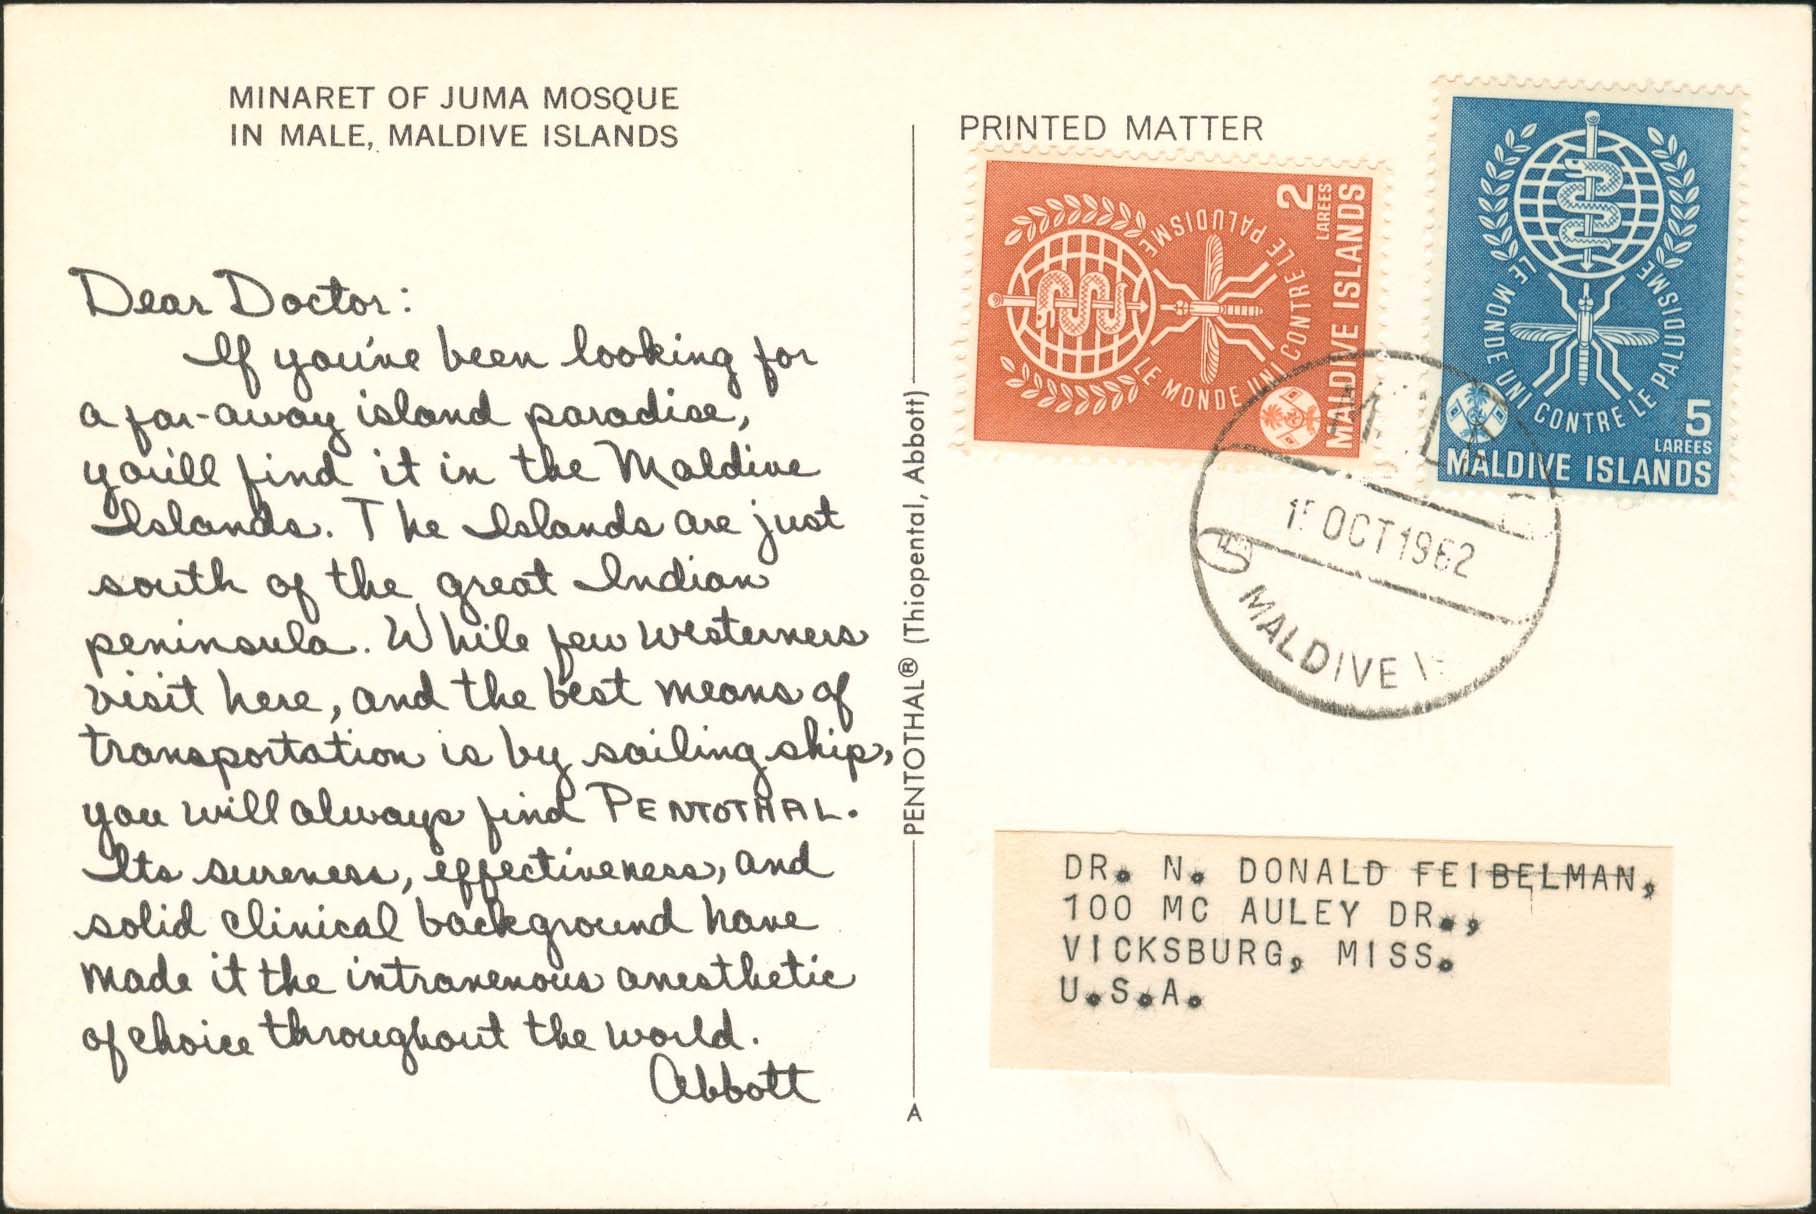 Dear Doctor Postcard - Type A - United States - 1962, Oct 15